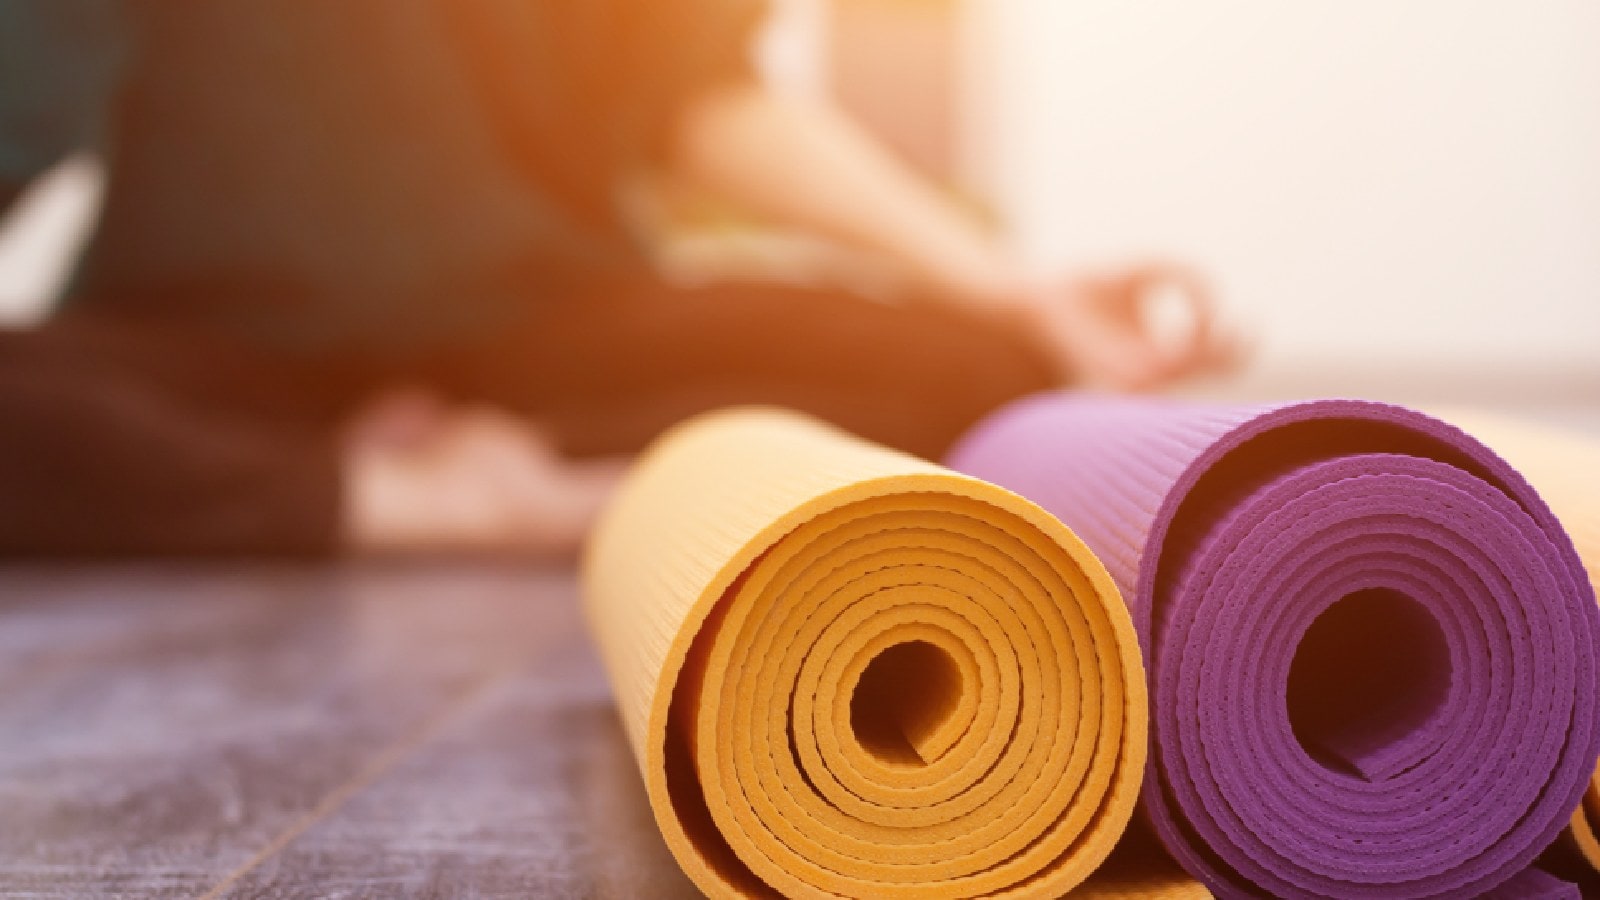 Discover the top 5 stylish yoga mats that provide solid support